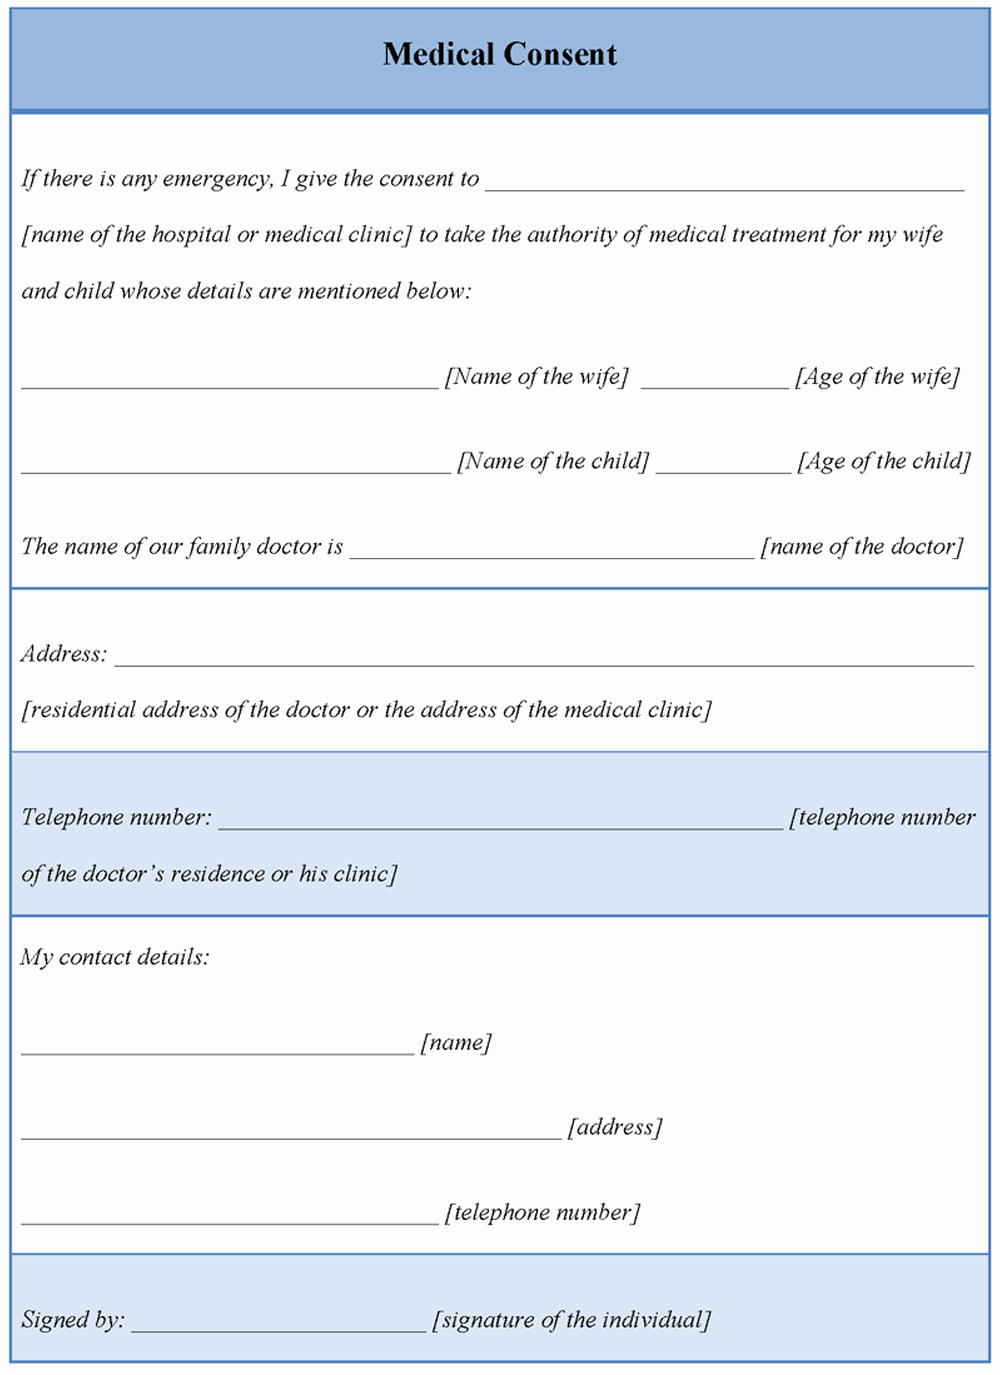 Medical Consent form Templates Awesome Medical Template for Consent form Example Of Medical